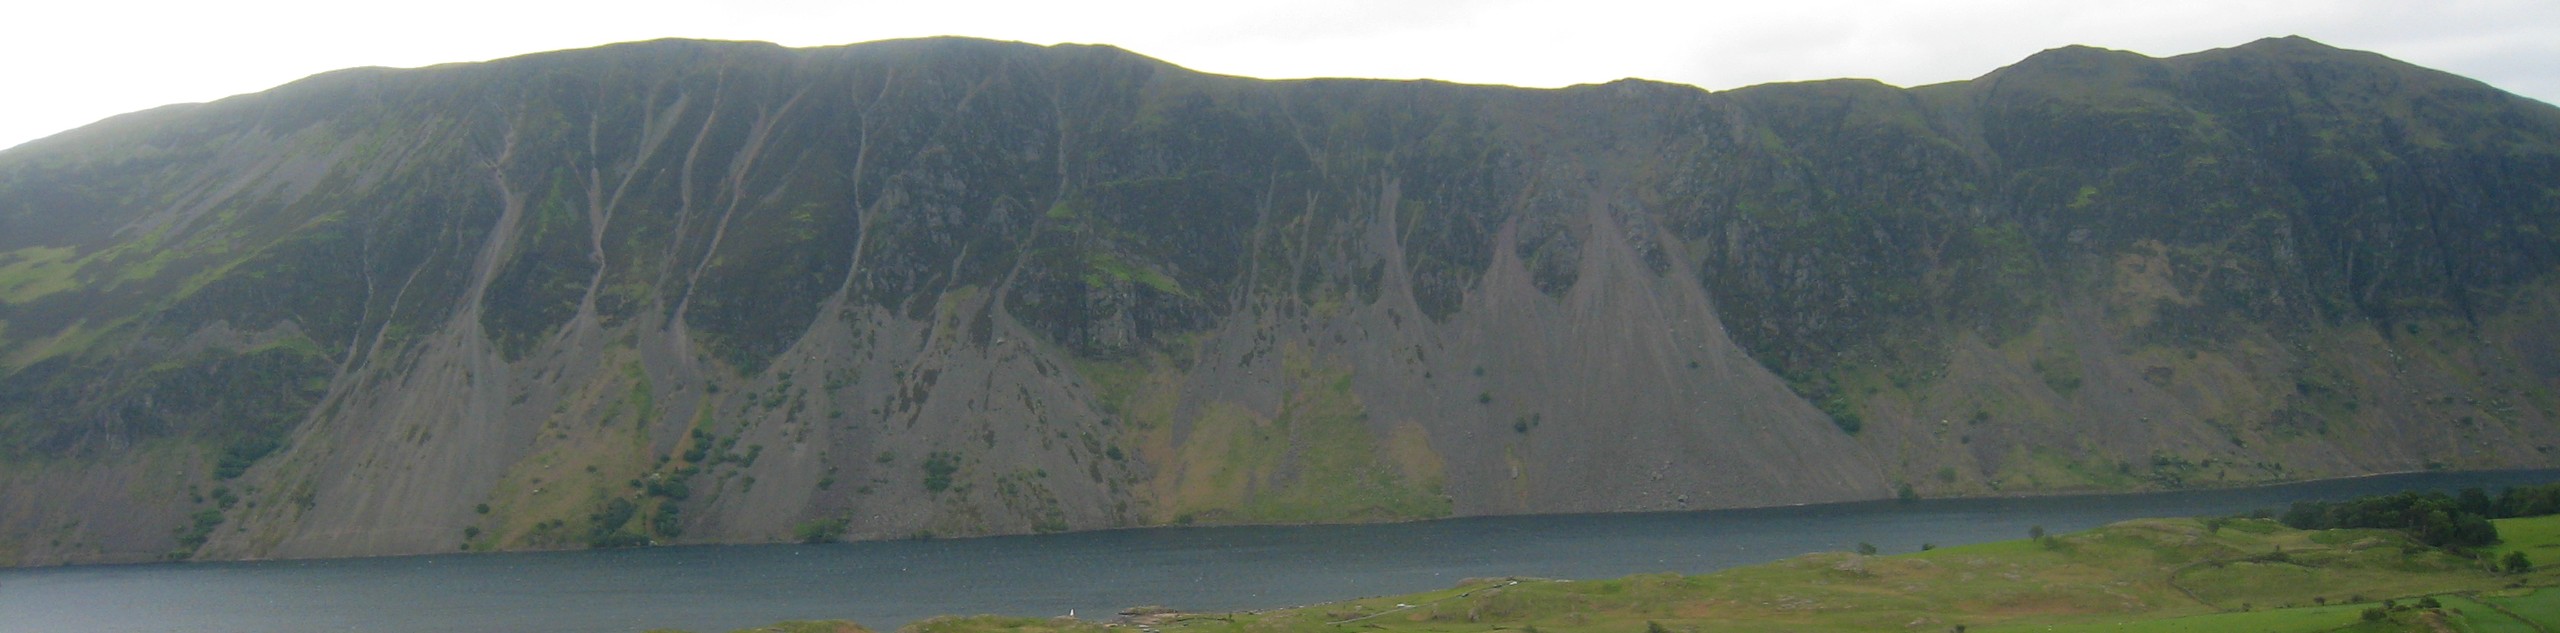 The Wasdale Screes Walk